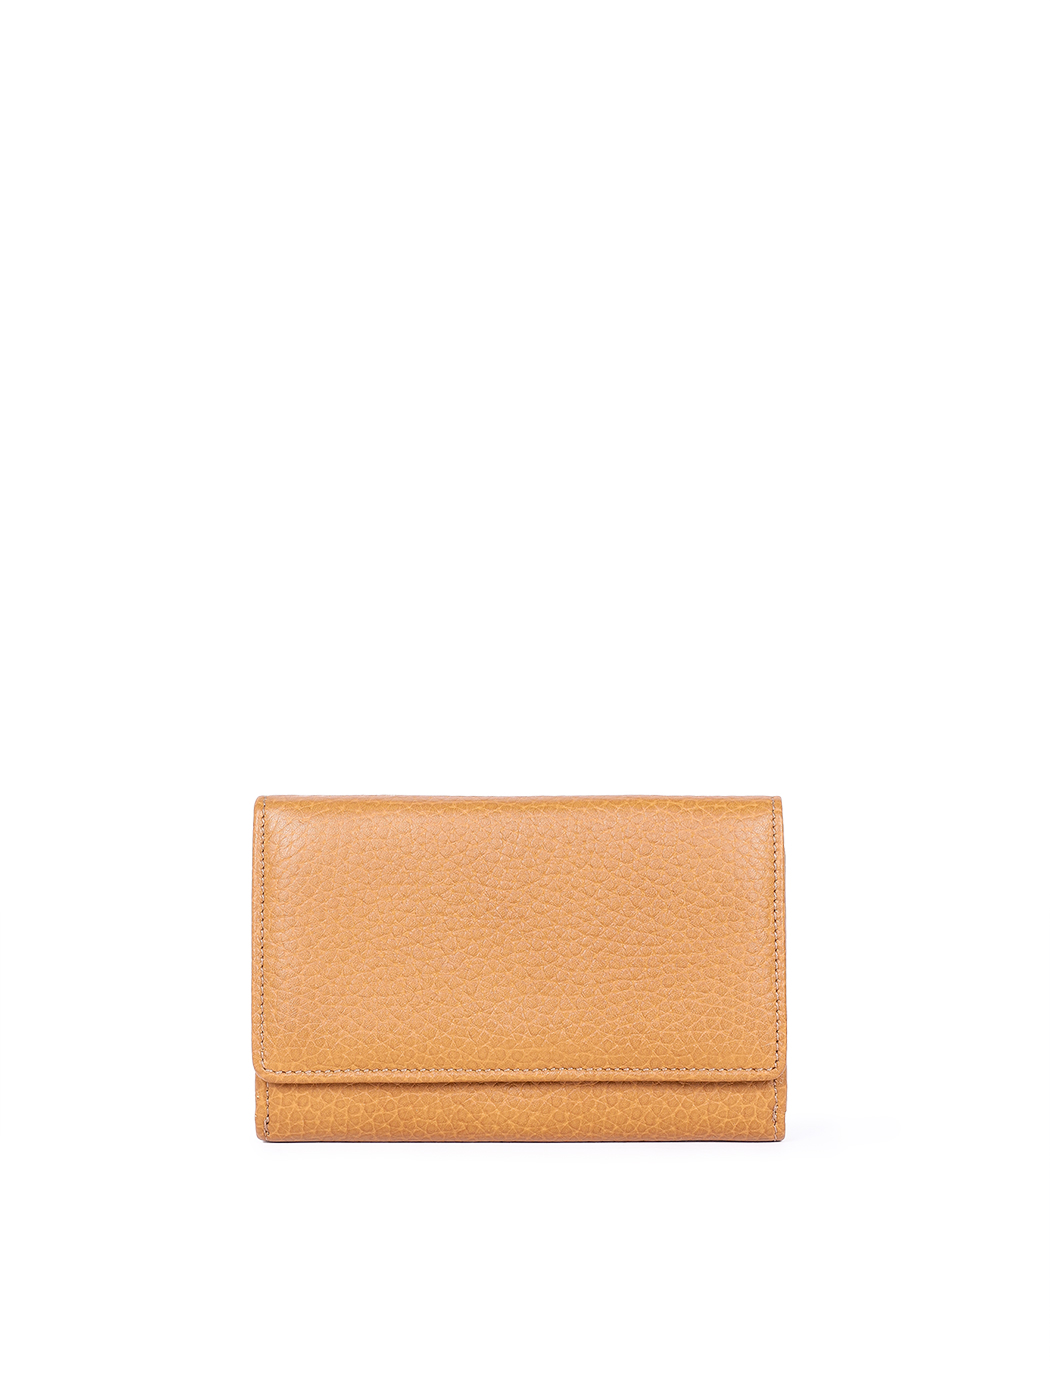 Small Leather Wallet Camel